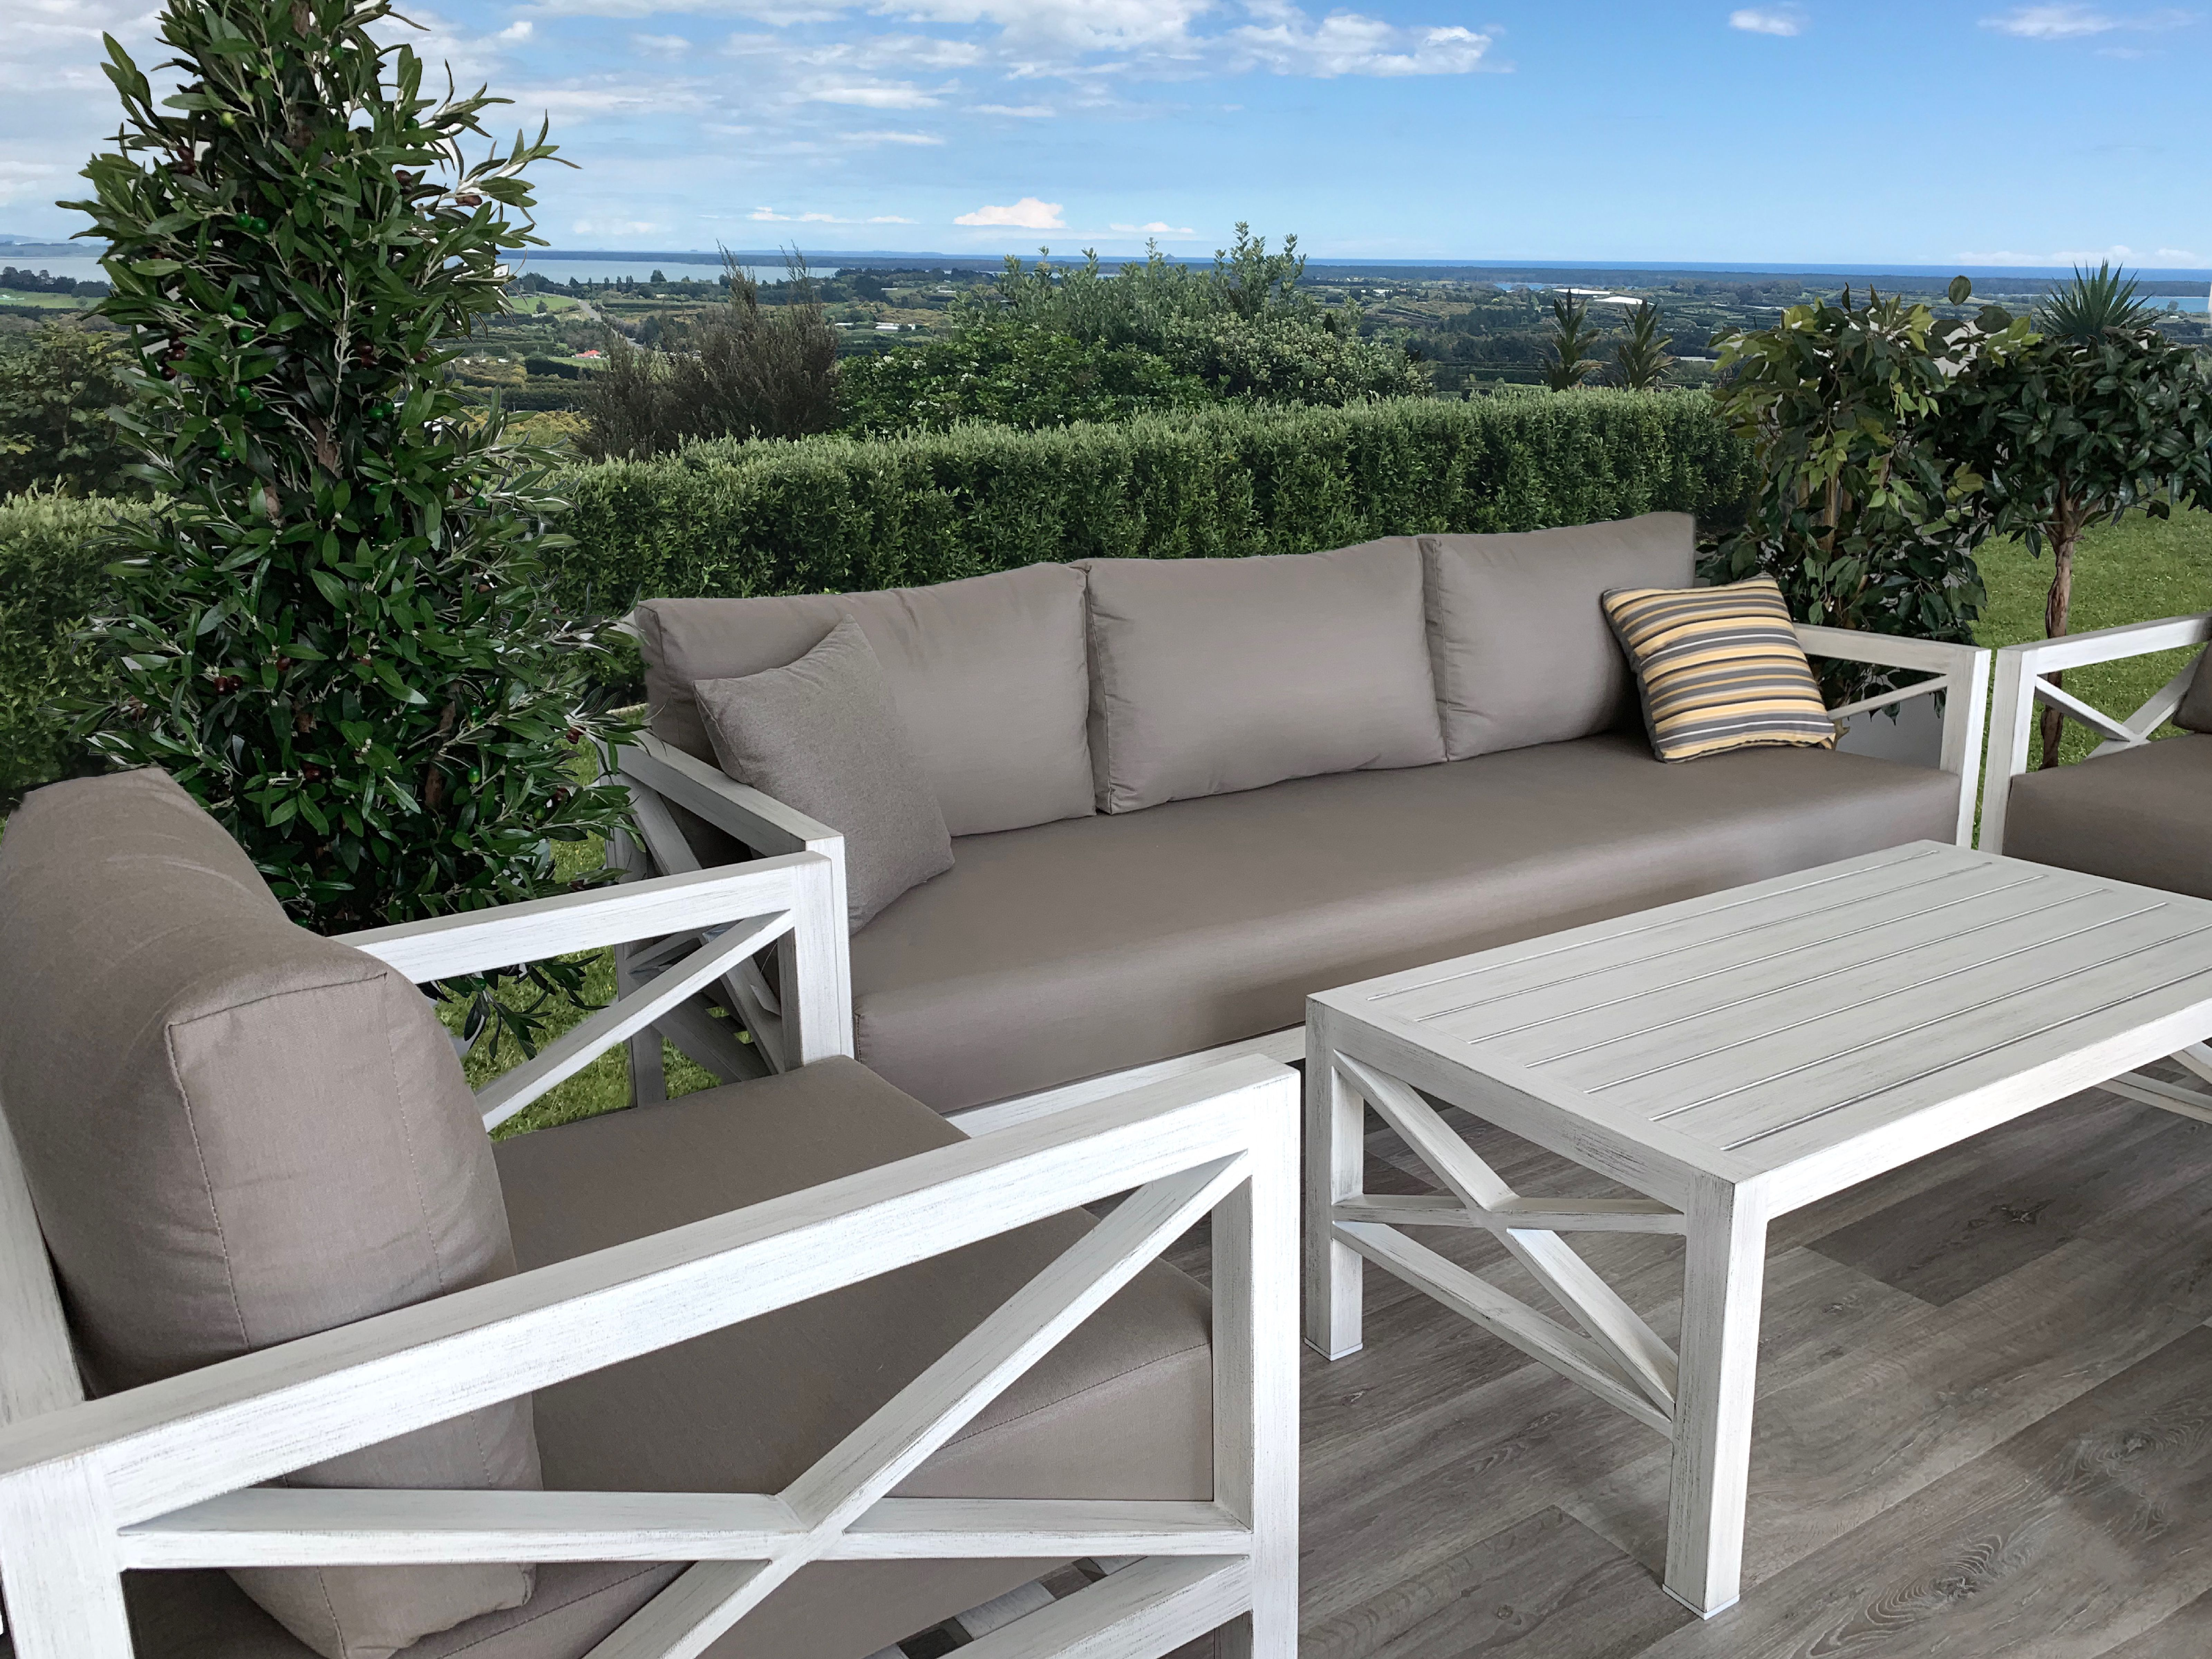 Modern Style Outdoor Furniture Nz Auckland Tauranga within dimensions 6400 X 4800